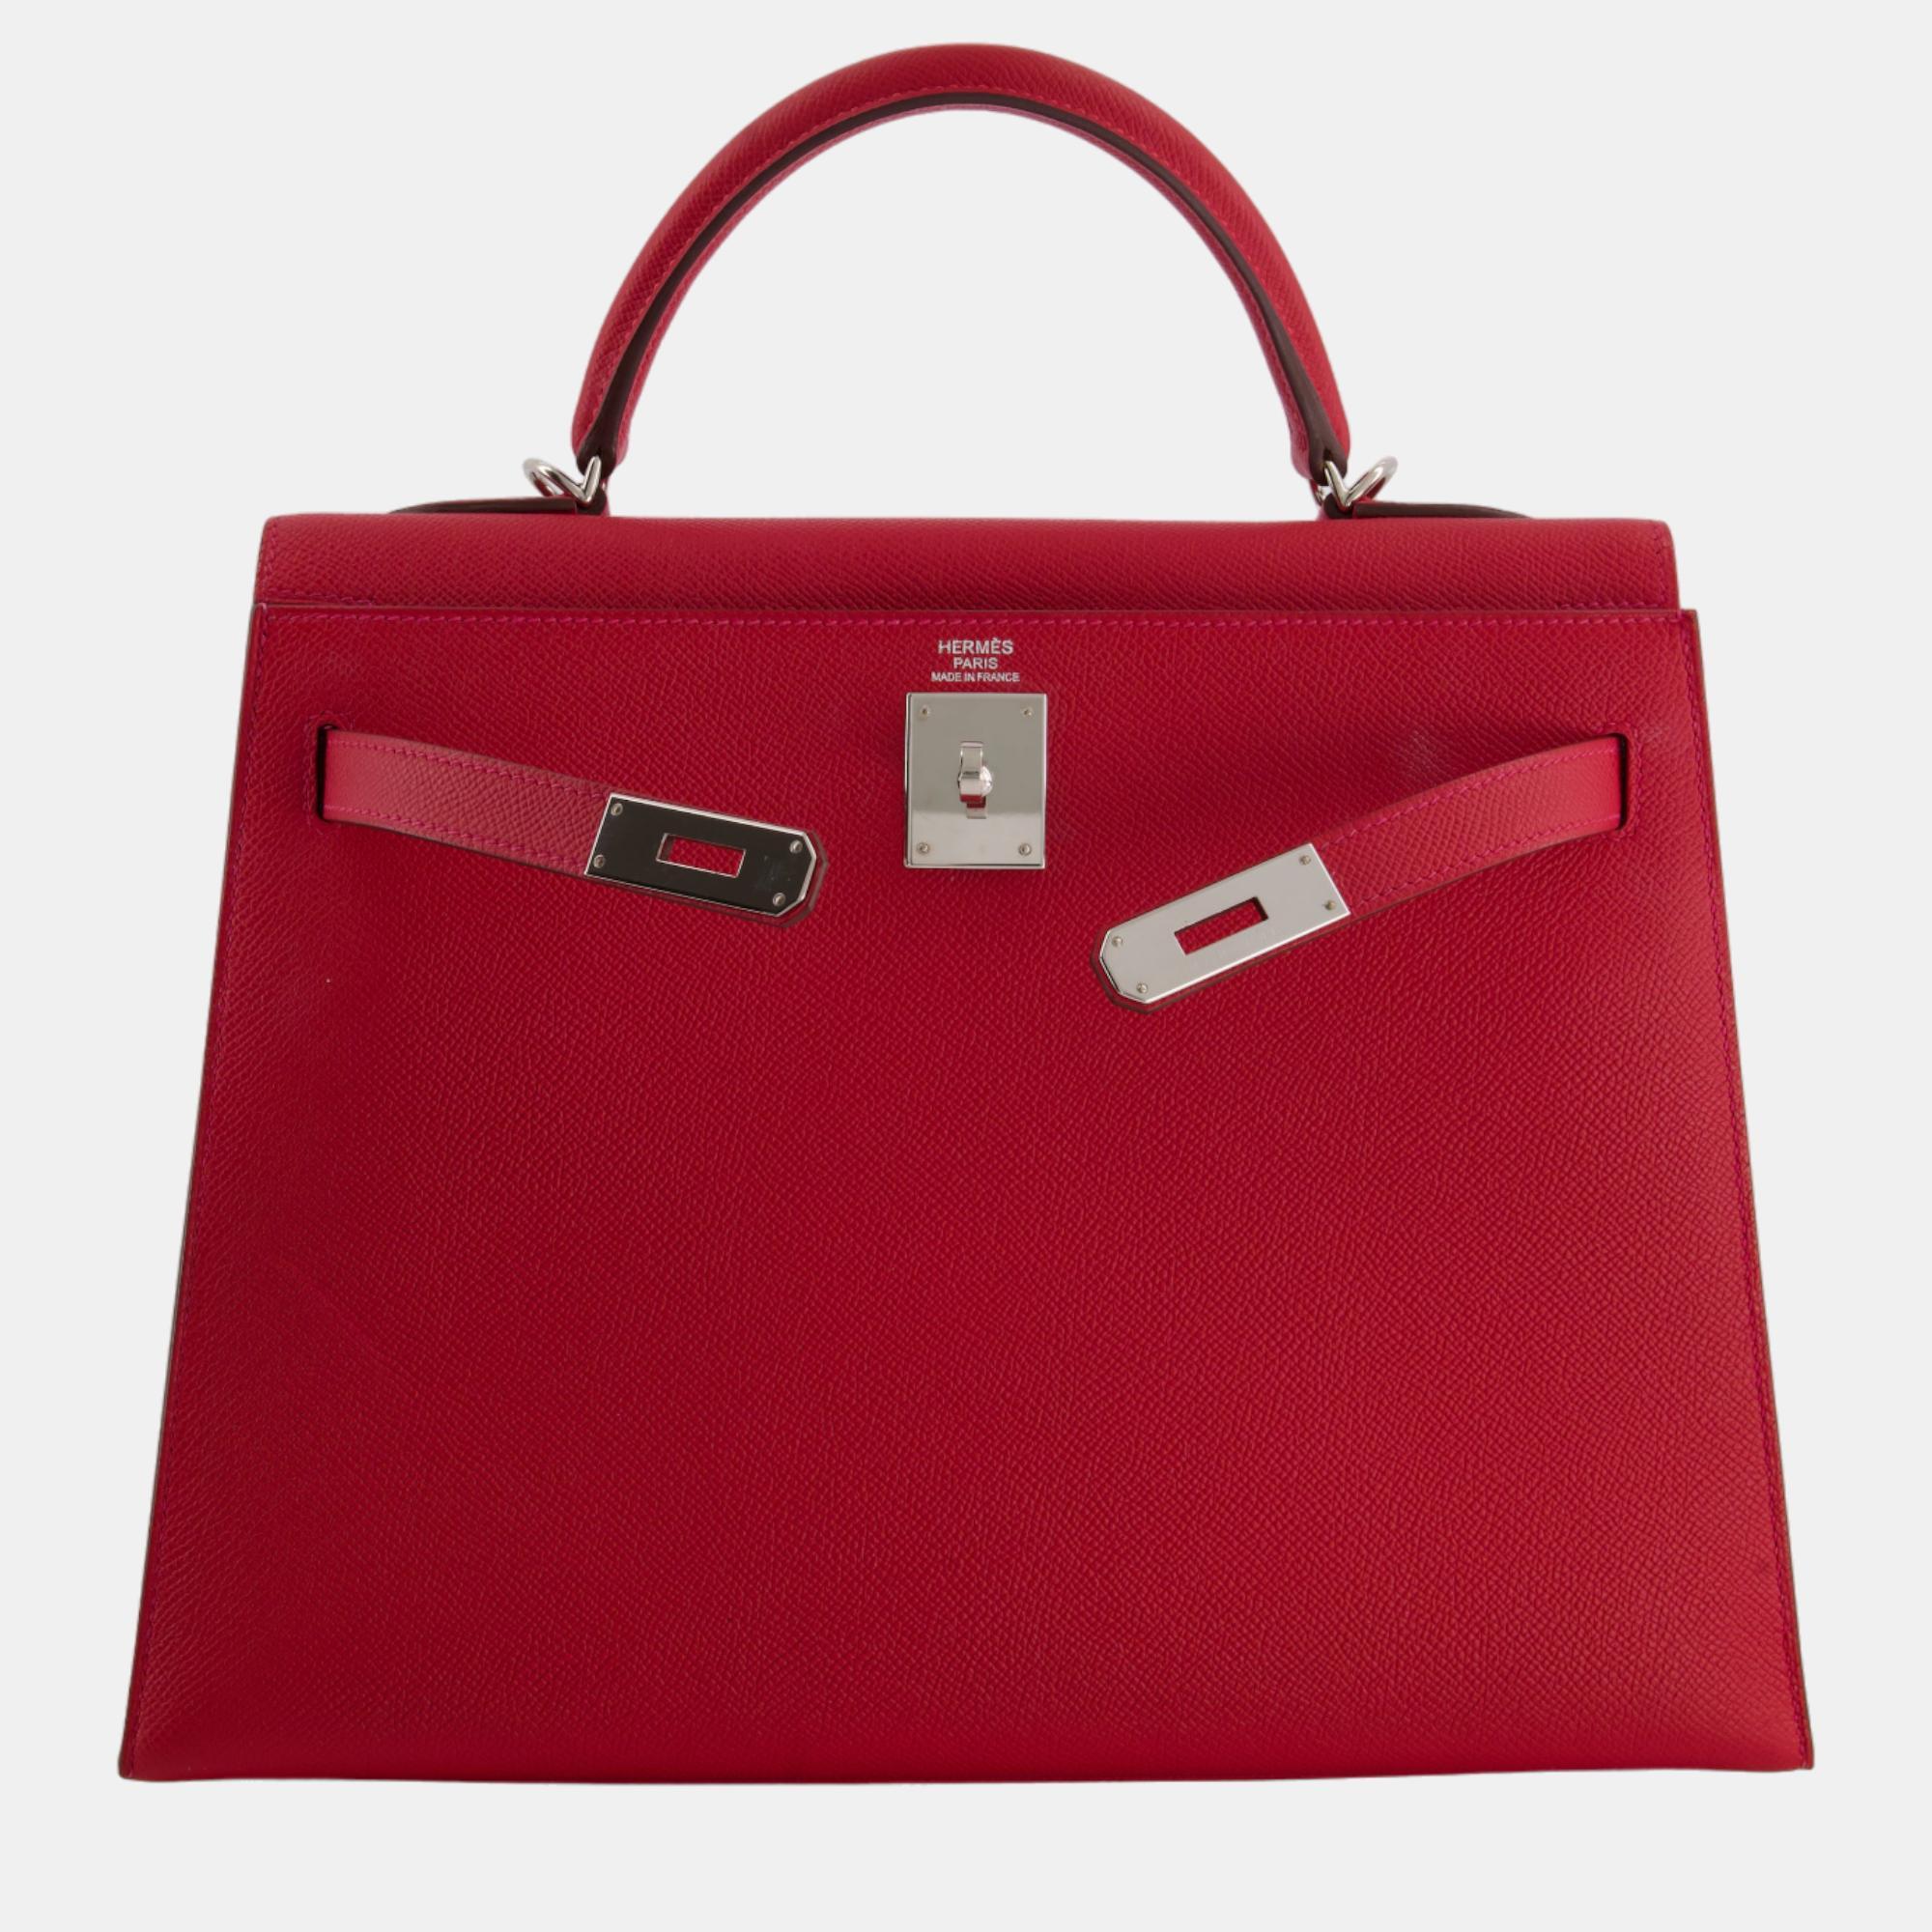 Hermes Kelly Bag 32cm In Rouge Piment Epsom Leather With Palladium Hardware